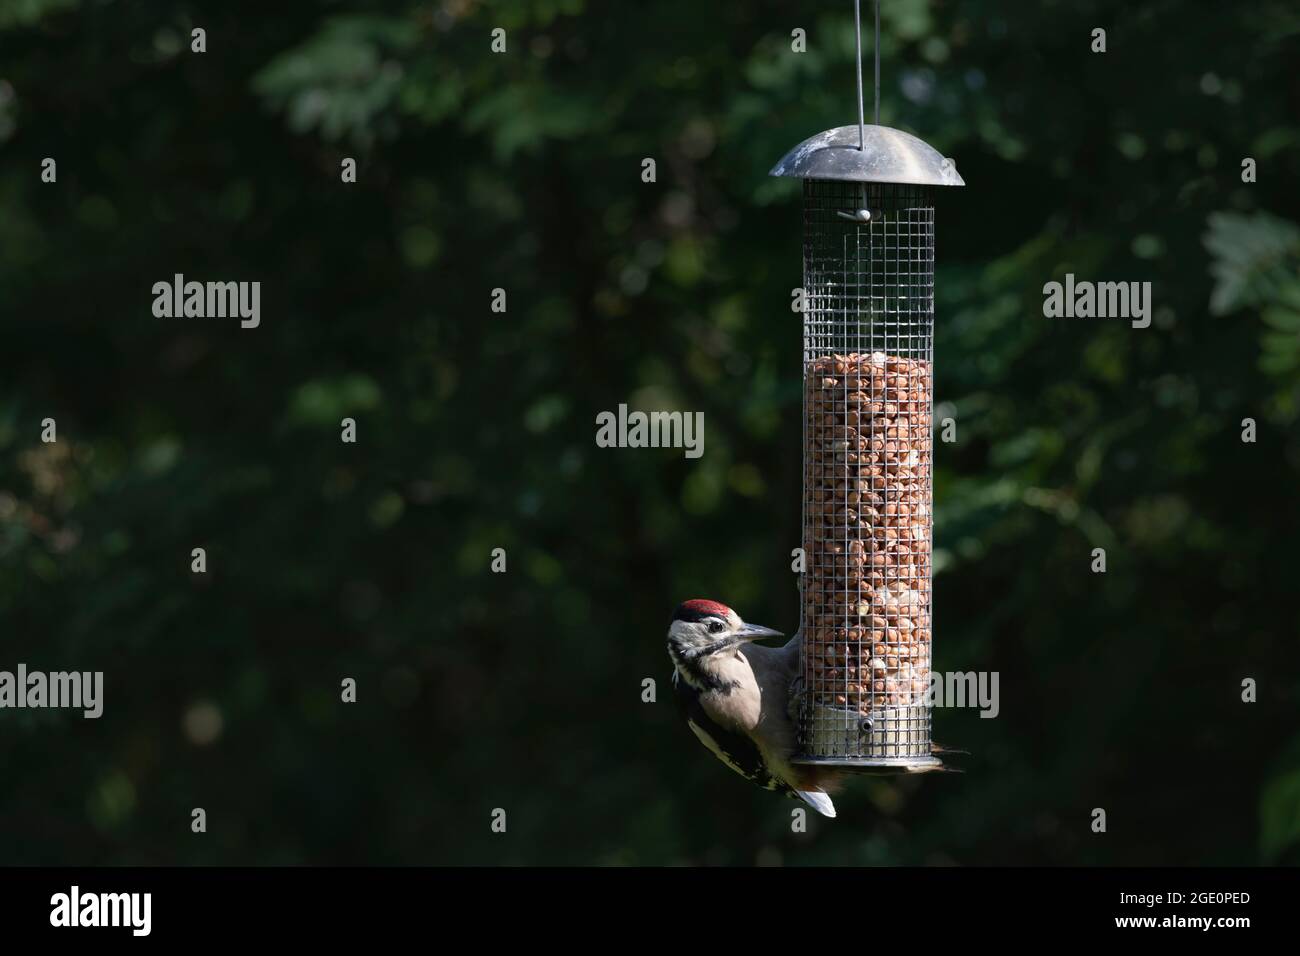 Sunlight Highlights a Great Spotted Woodpecker (Dendrocopos Major) as it Clings to a Garden Bird Feeder Filled with Peanuts Stock Photo